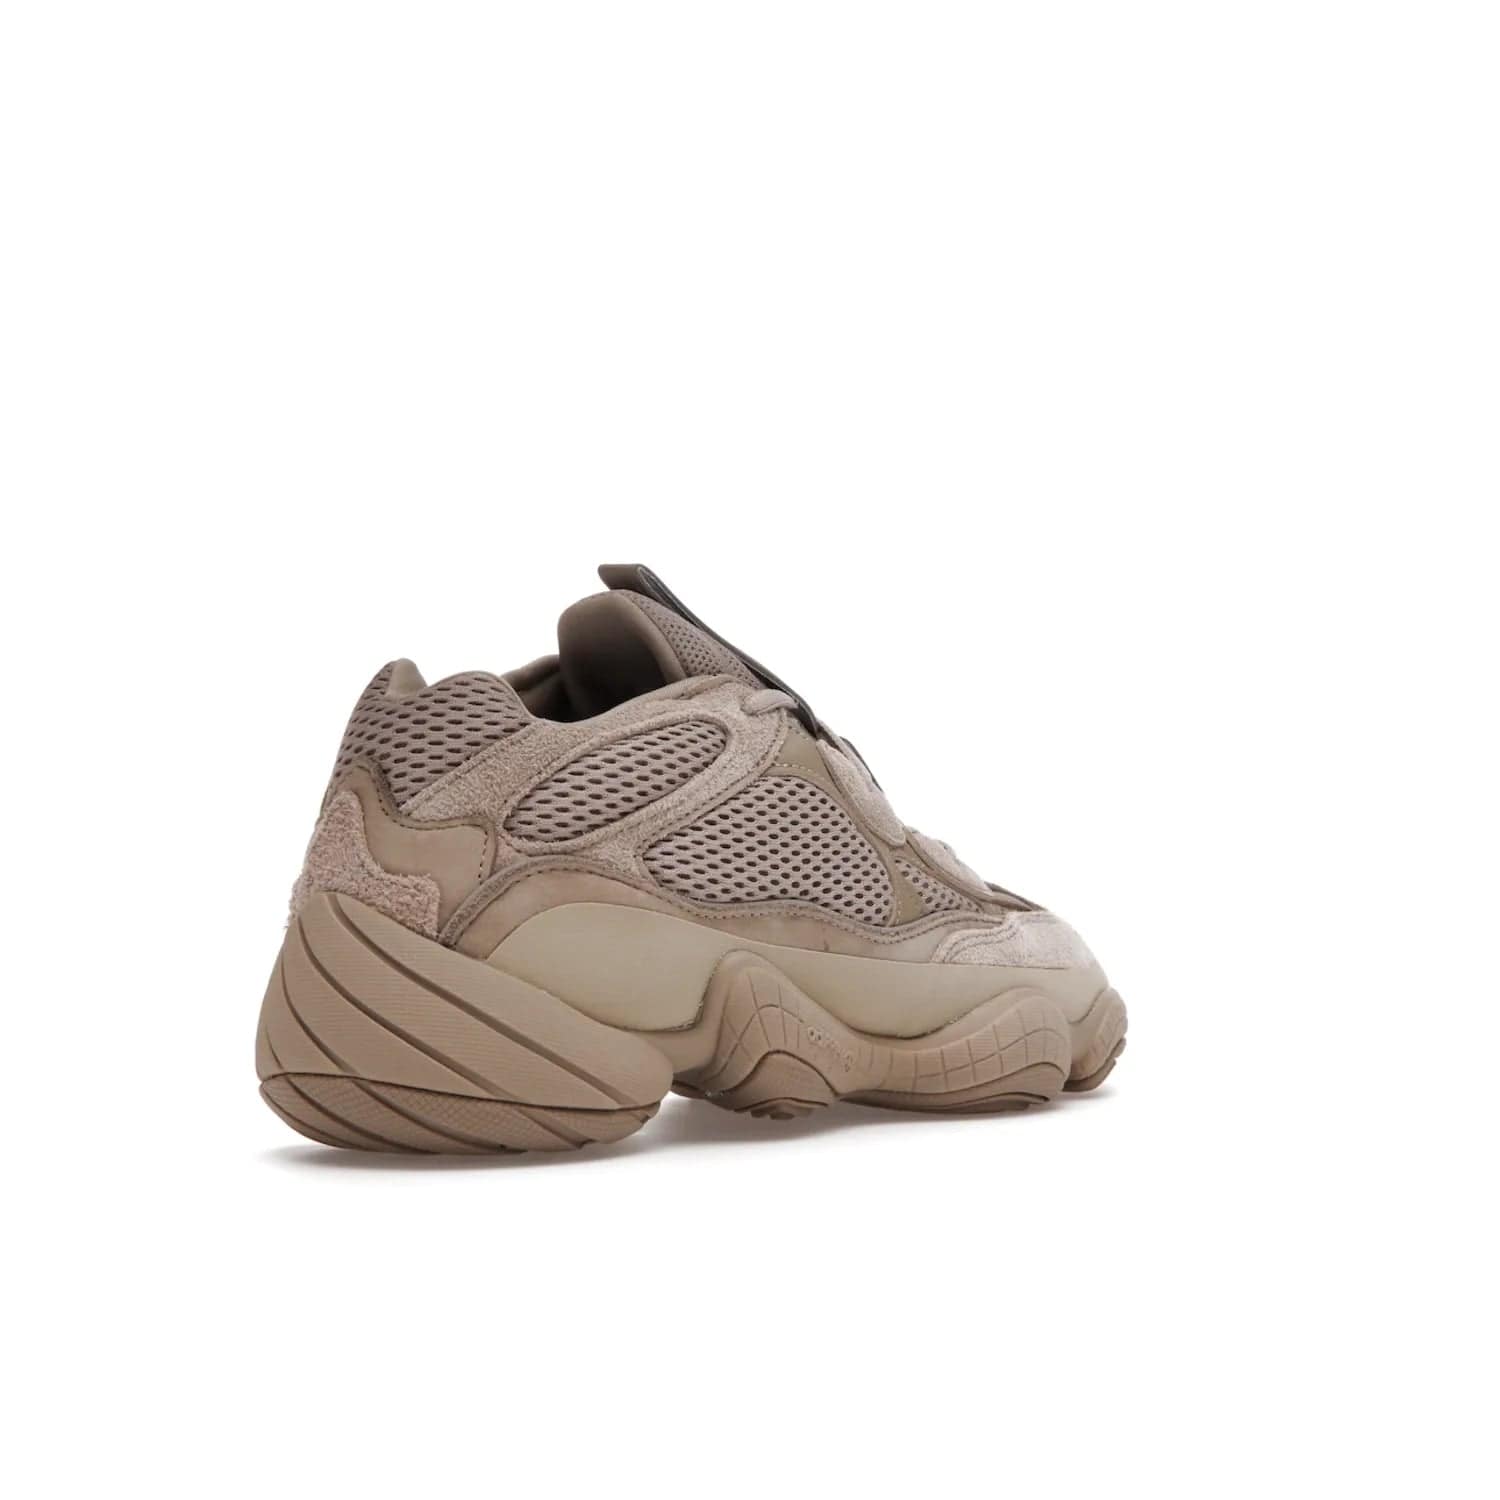 adidas Yeezy 500 Taupe Light - Image 32 - Only at www.BallersClubKickz.com - The adidas Yeezy 500 Taupe Light combines mesh, leather, and suede, with a durable adiPRENE sole for an eye-catching accessory. Reflective piping adds the perfect finishing touches to this unique silhouette. Ideal for any wardrobe, releasing in June 2021.